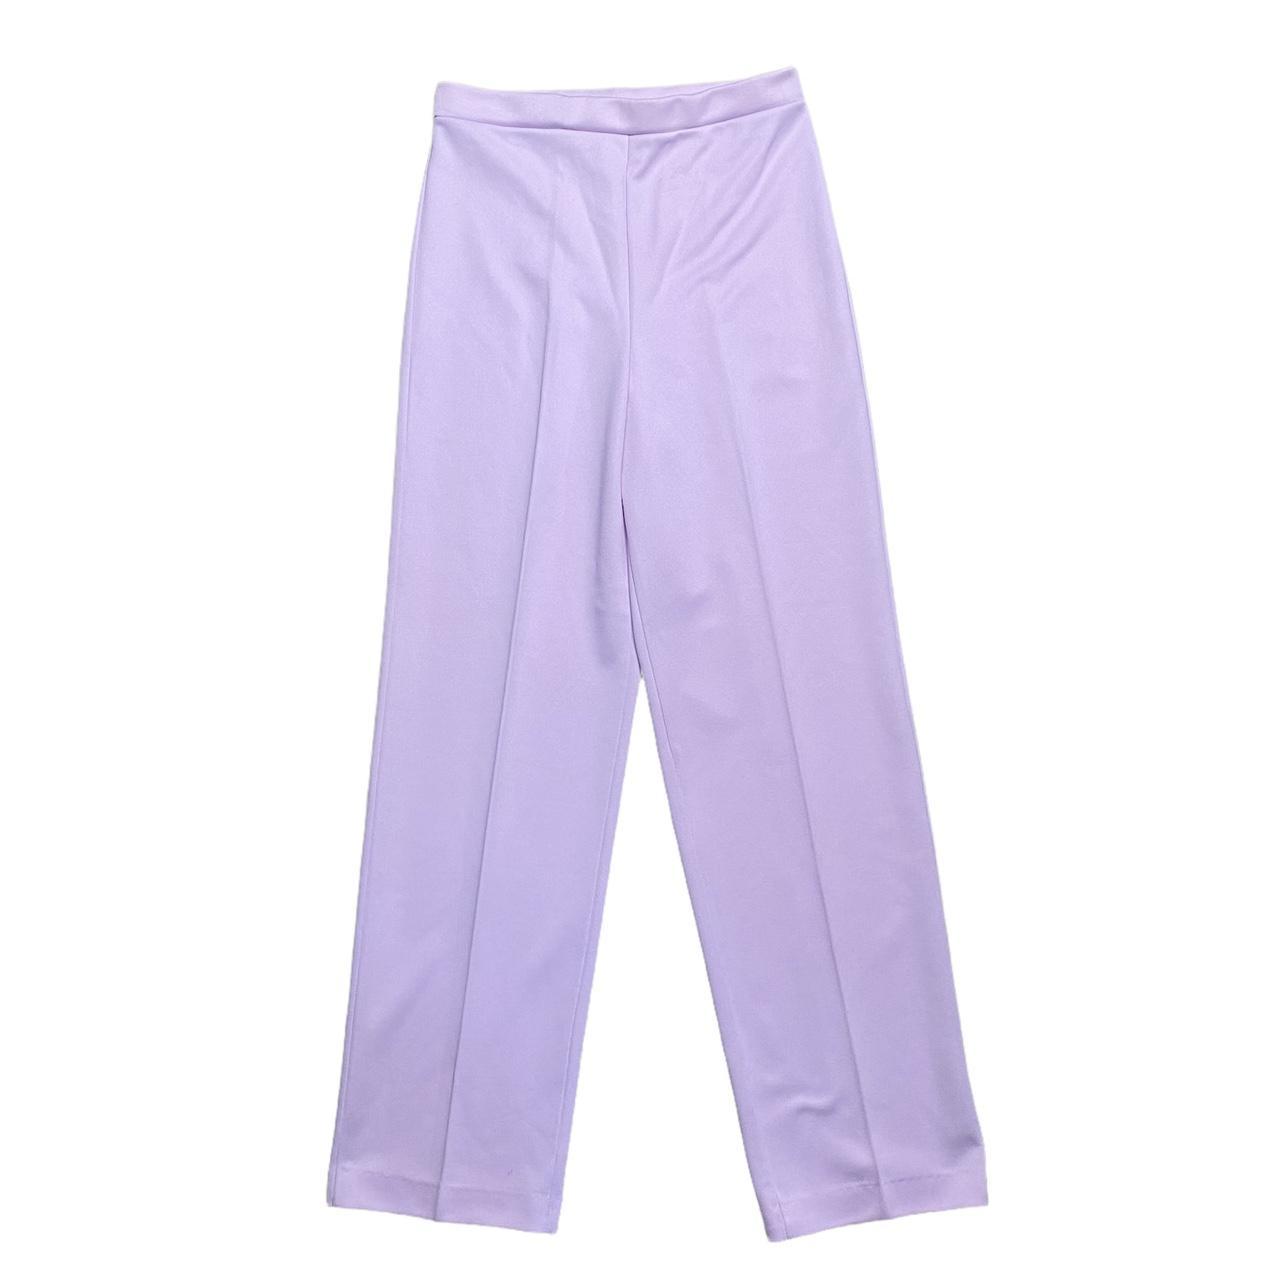 Purple Denim Jeans For Men Straight Loose Spring Fall Oversize Wide Leg  Pants High Street Bright Line Vintage Men Jeans Trousers G0104 From  Davidsmenswearshop01, $45.54 | DHgate.Com